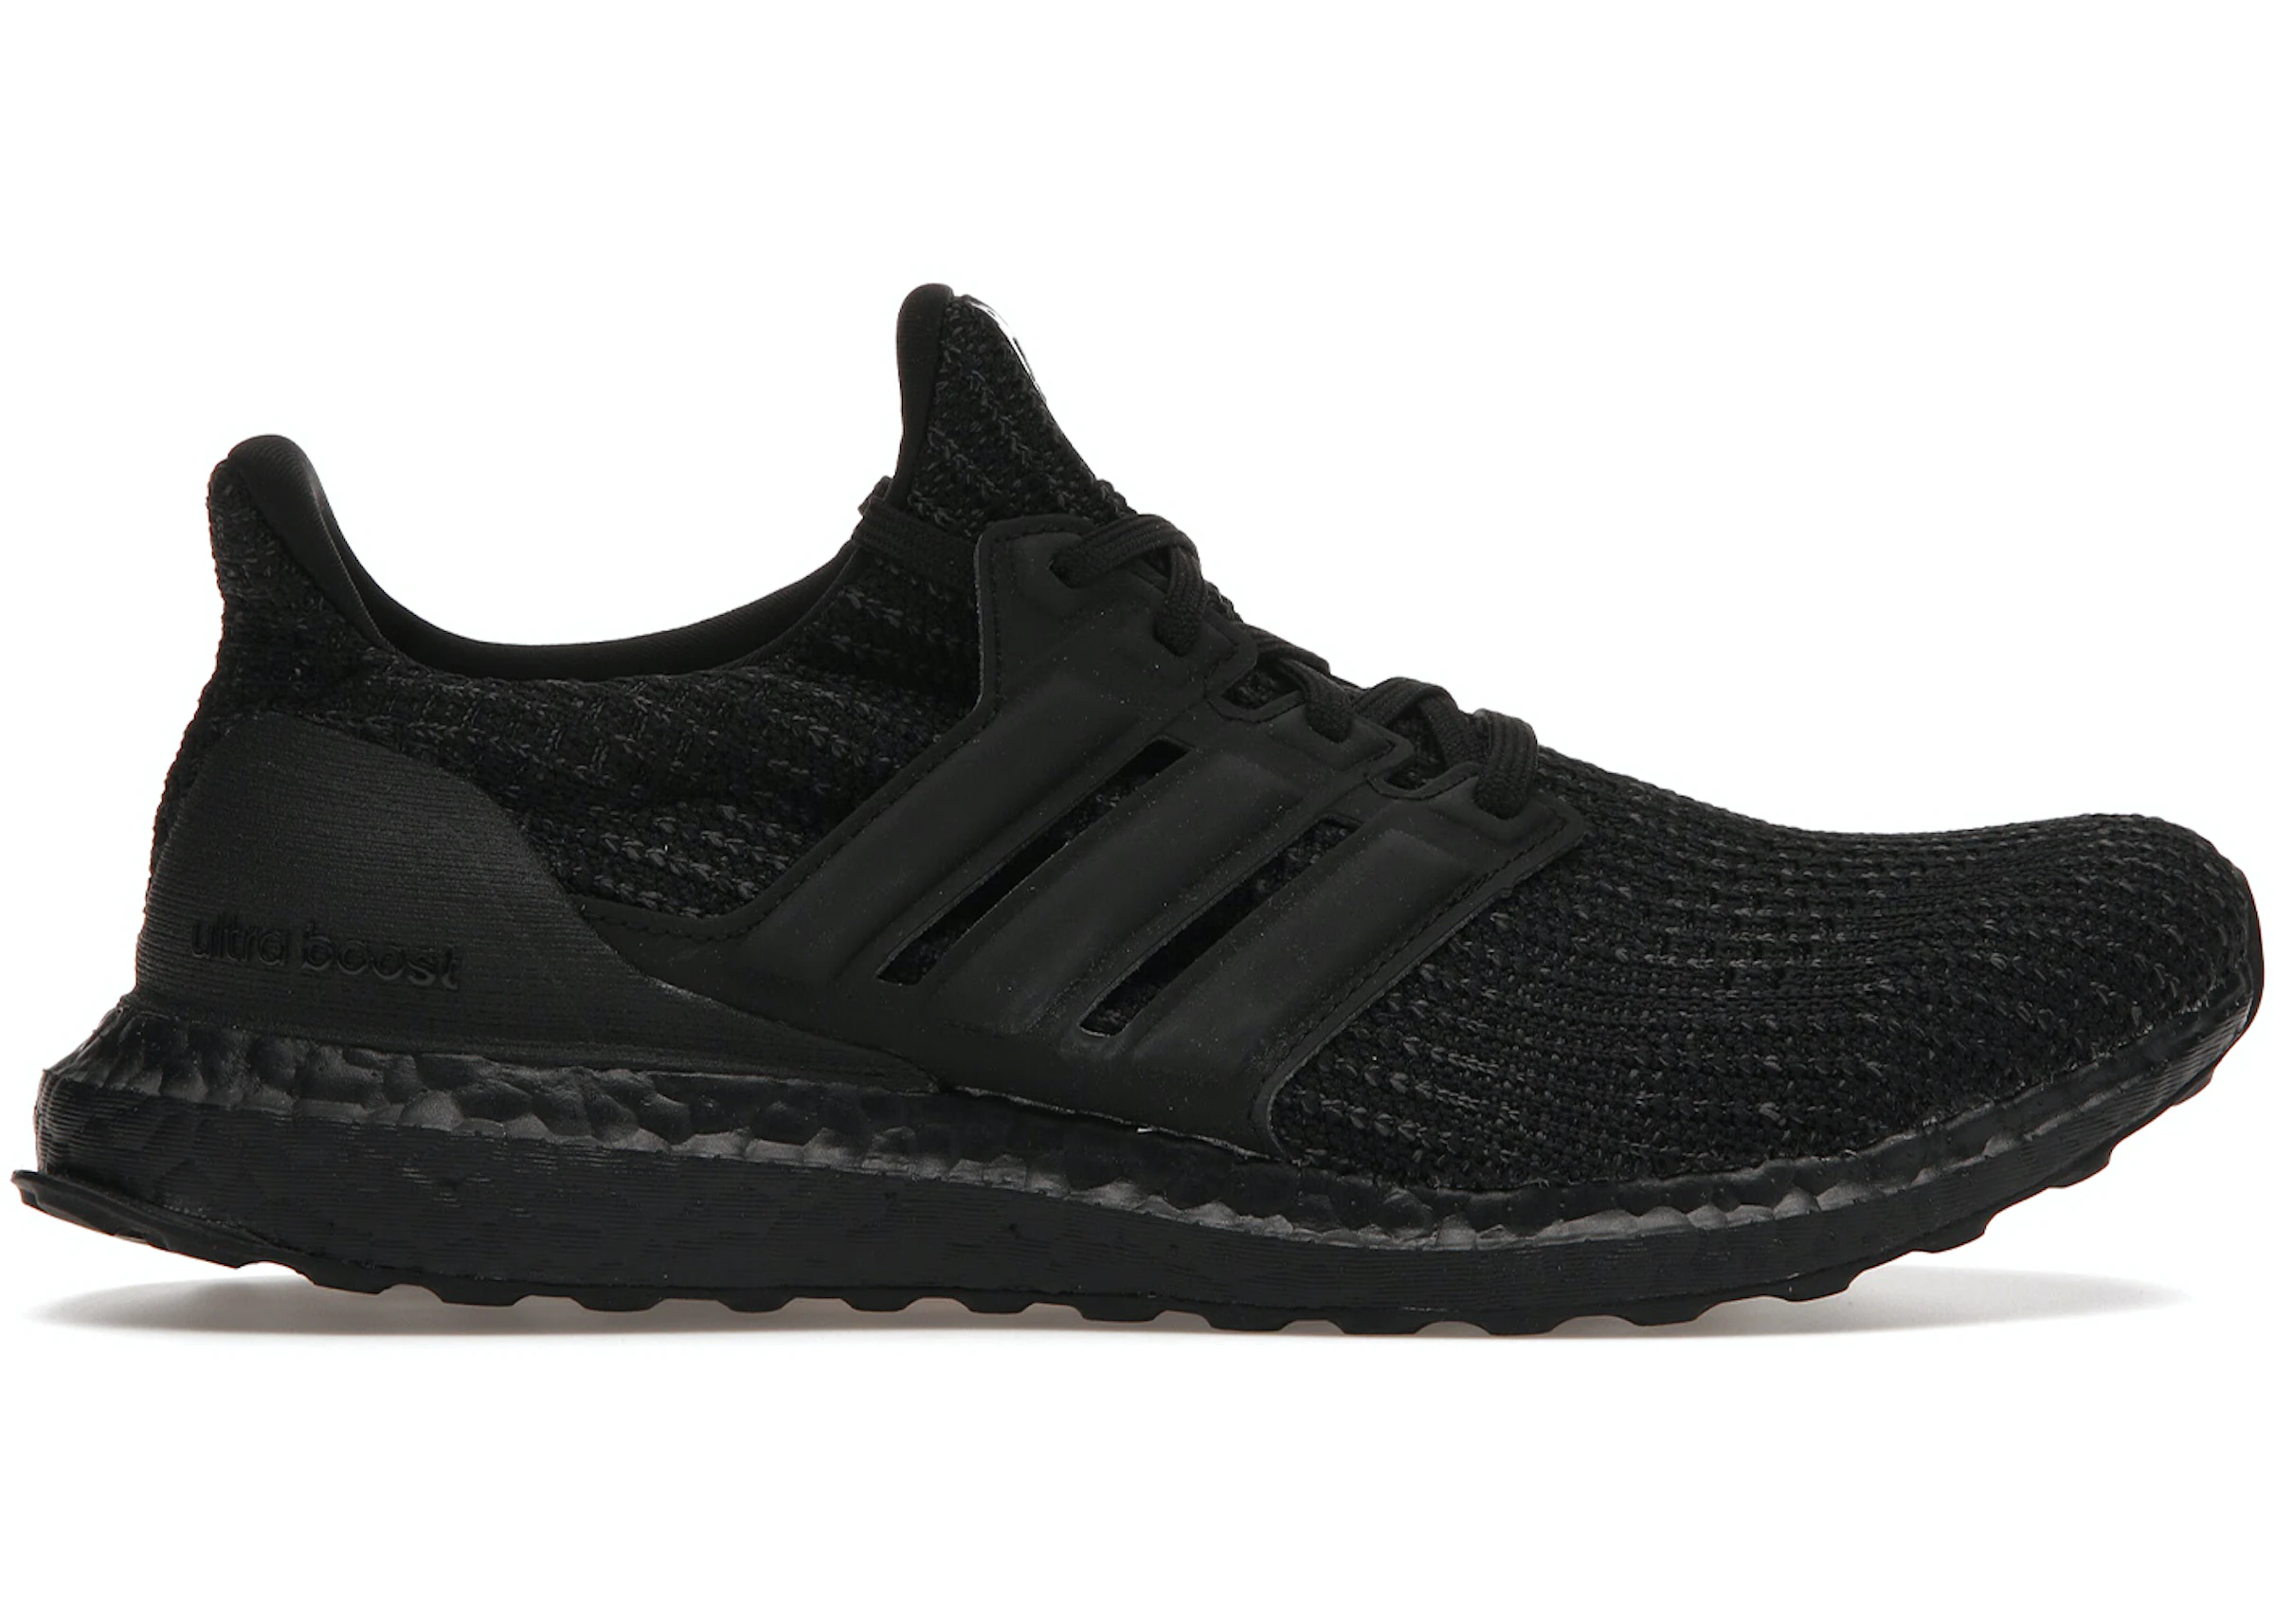 venganza comestible Acera Buy adidas Ultra Boost Shoes & New Sneakers - StockX